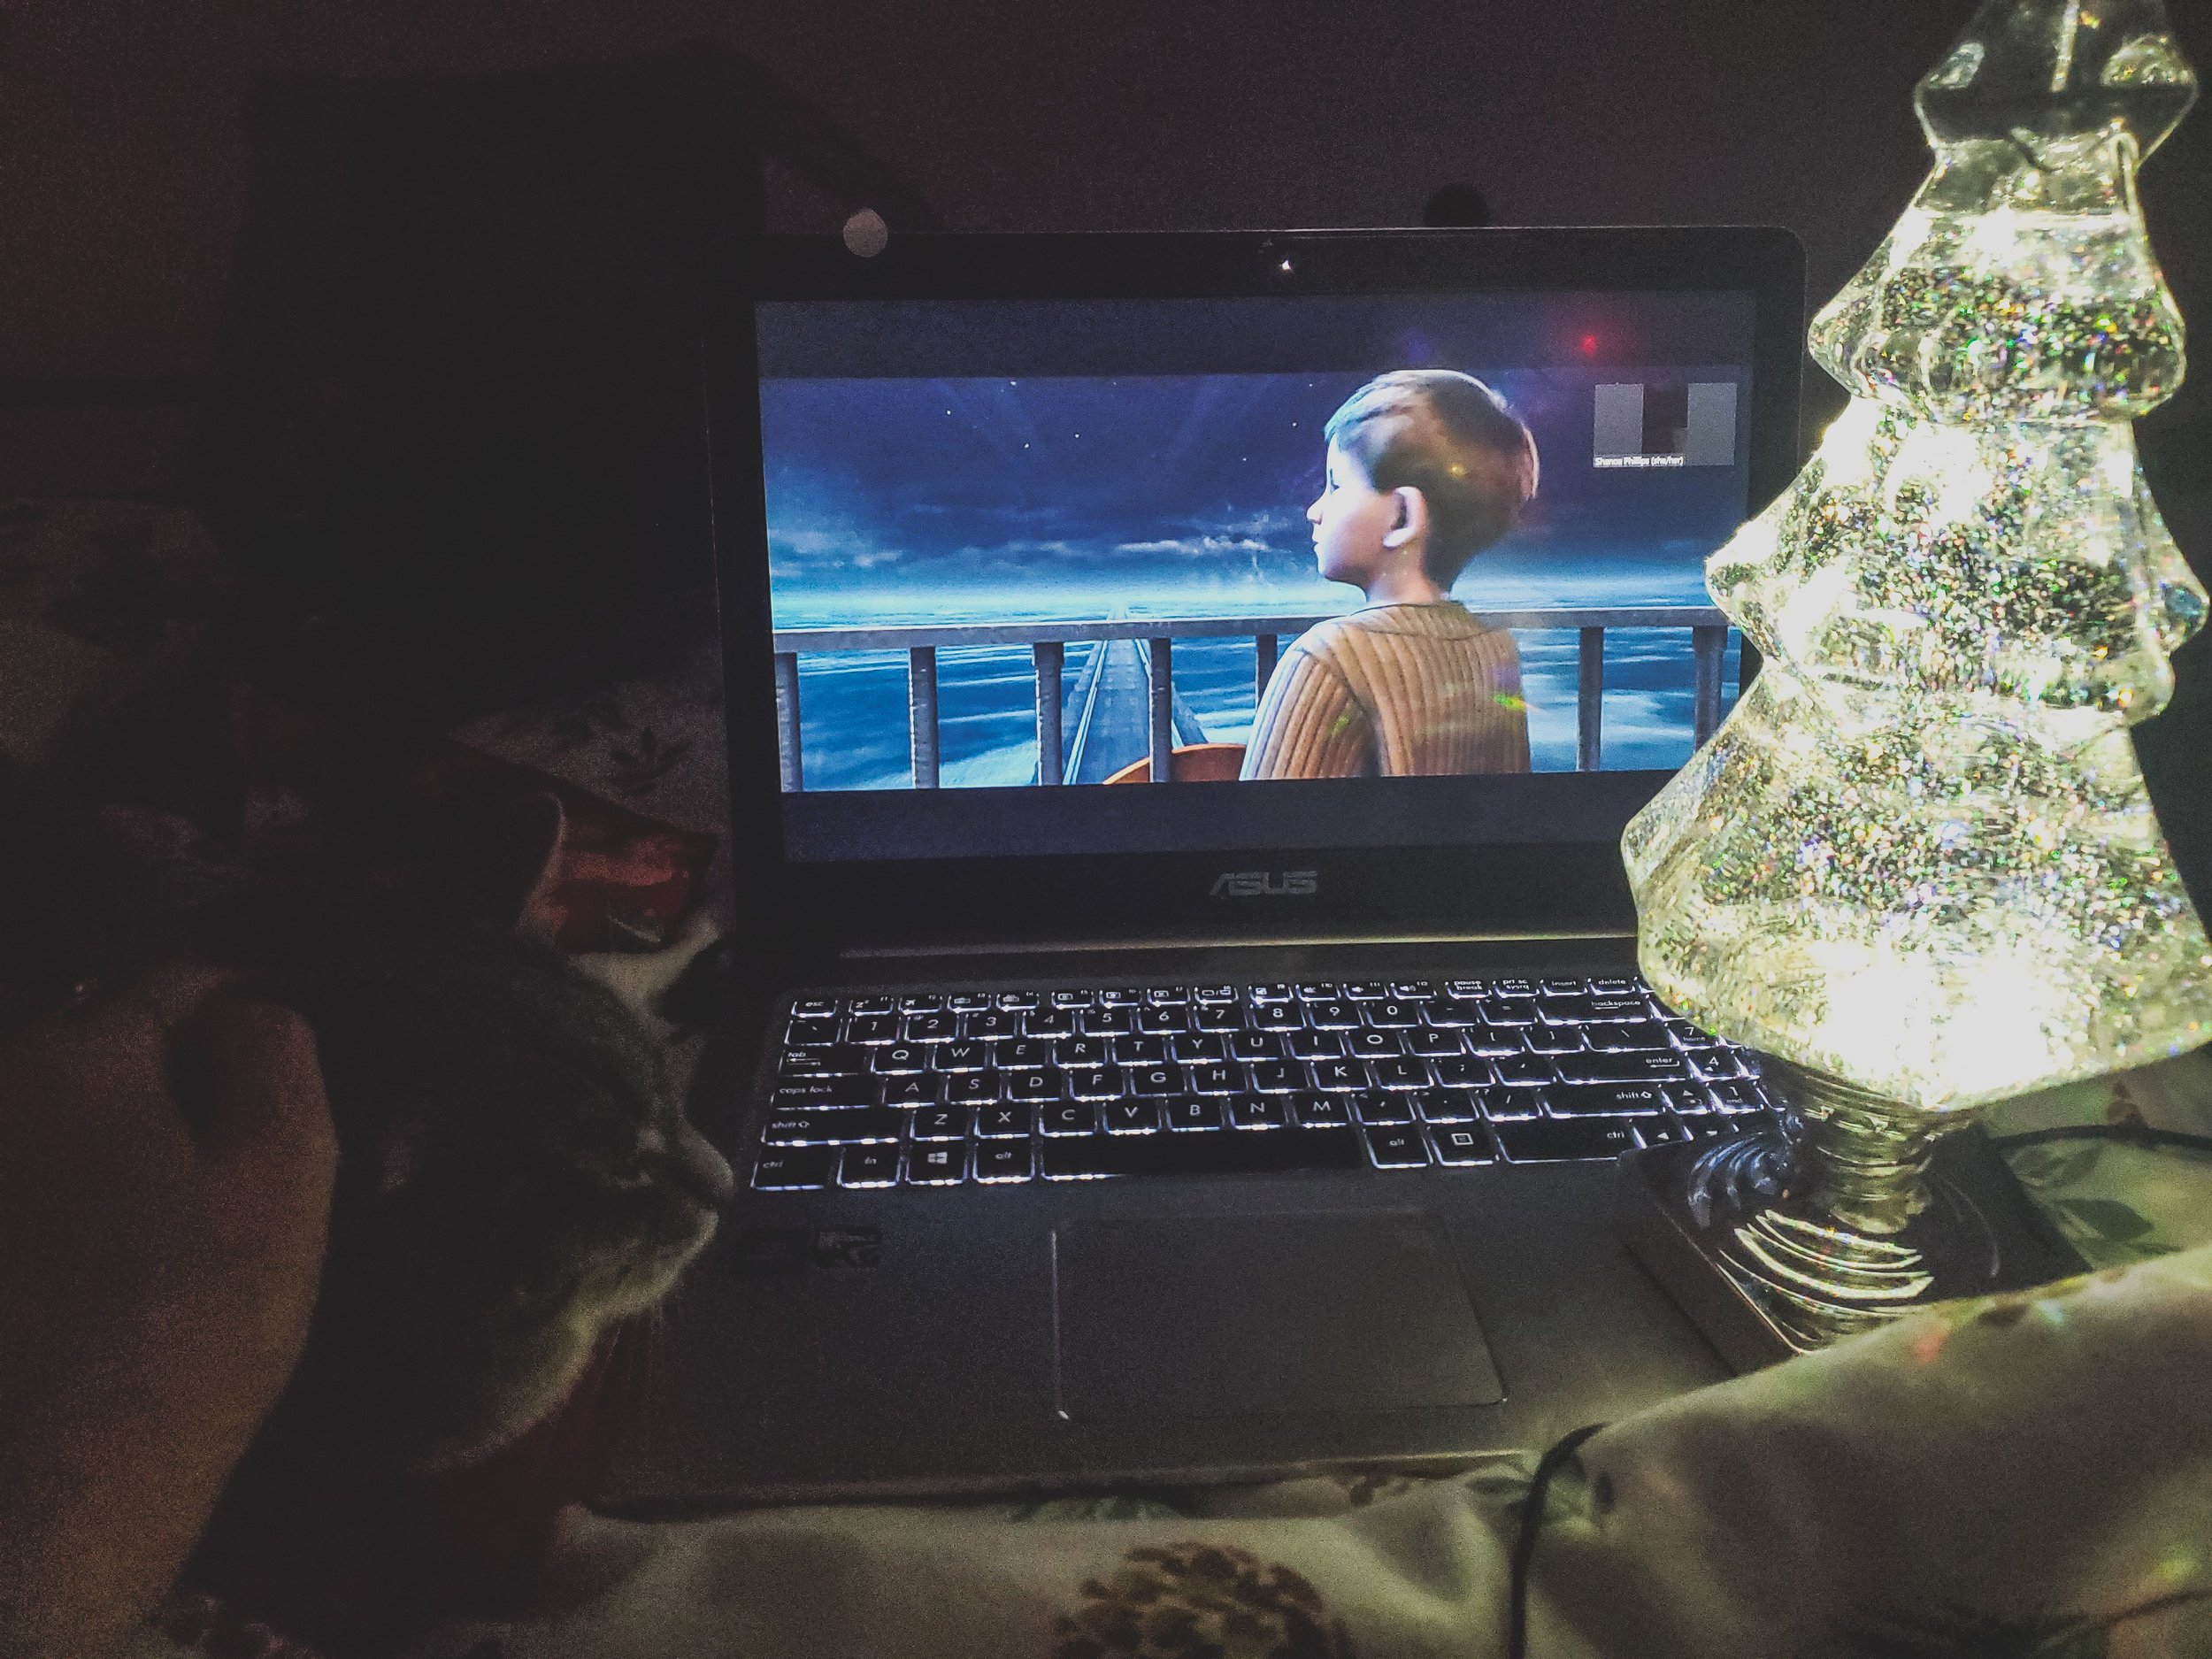  Look at this magical set up! a kitty, some lights and Christmas movie and my best friend.  